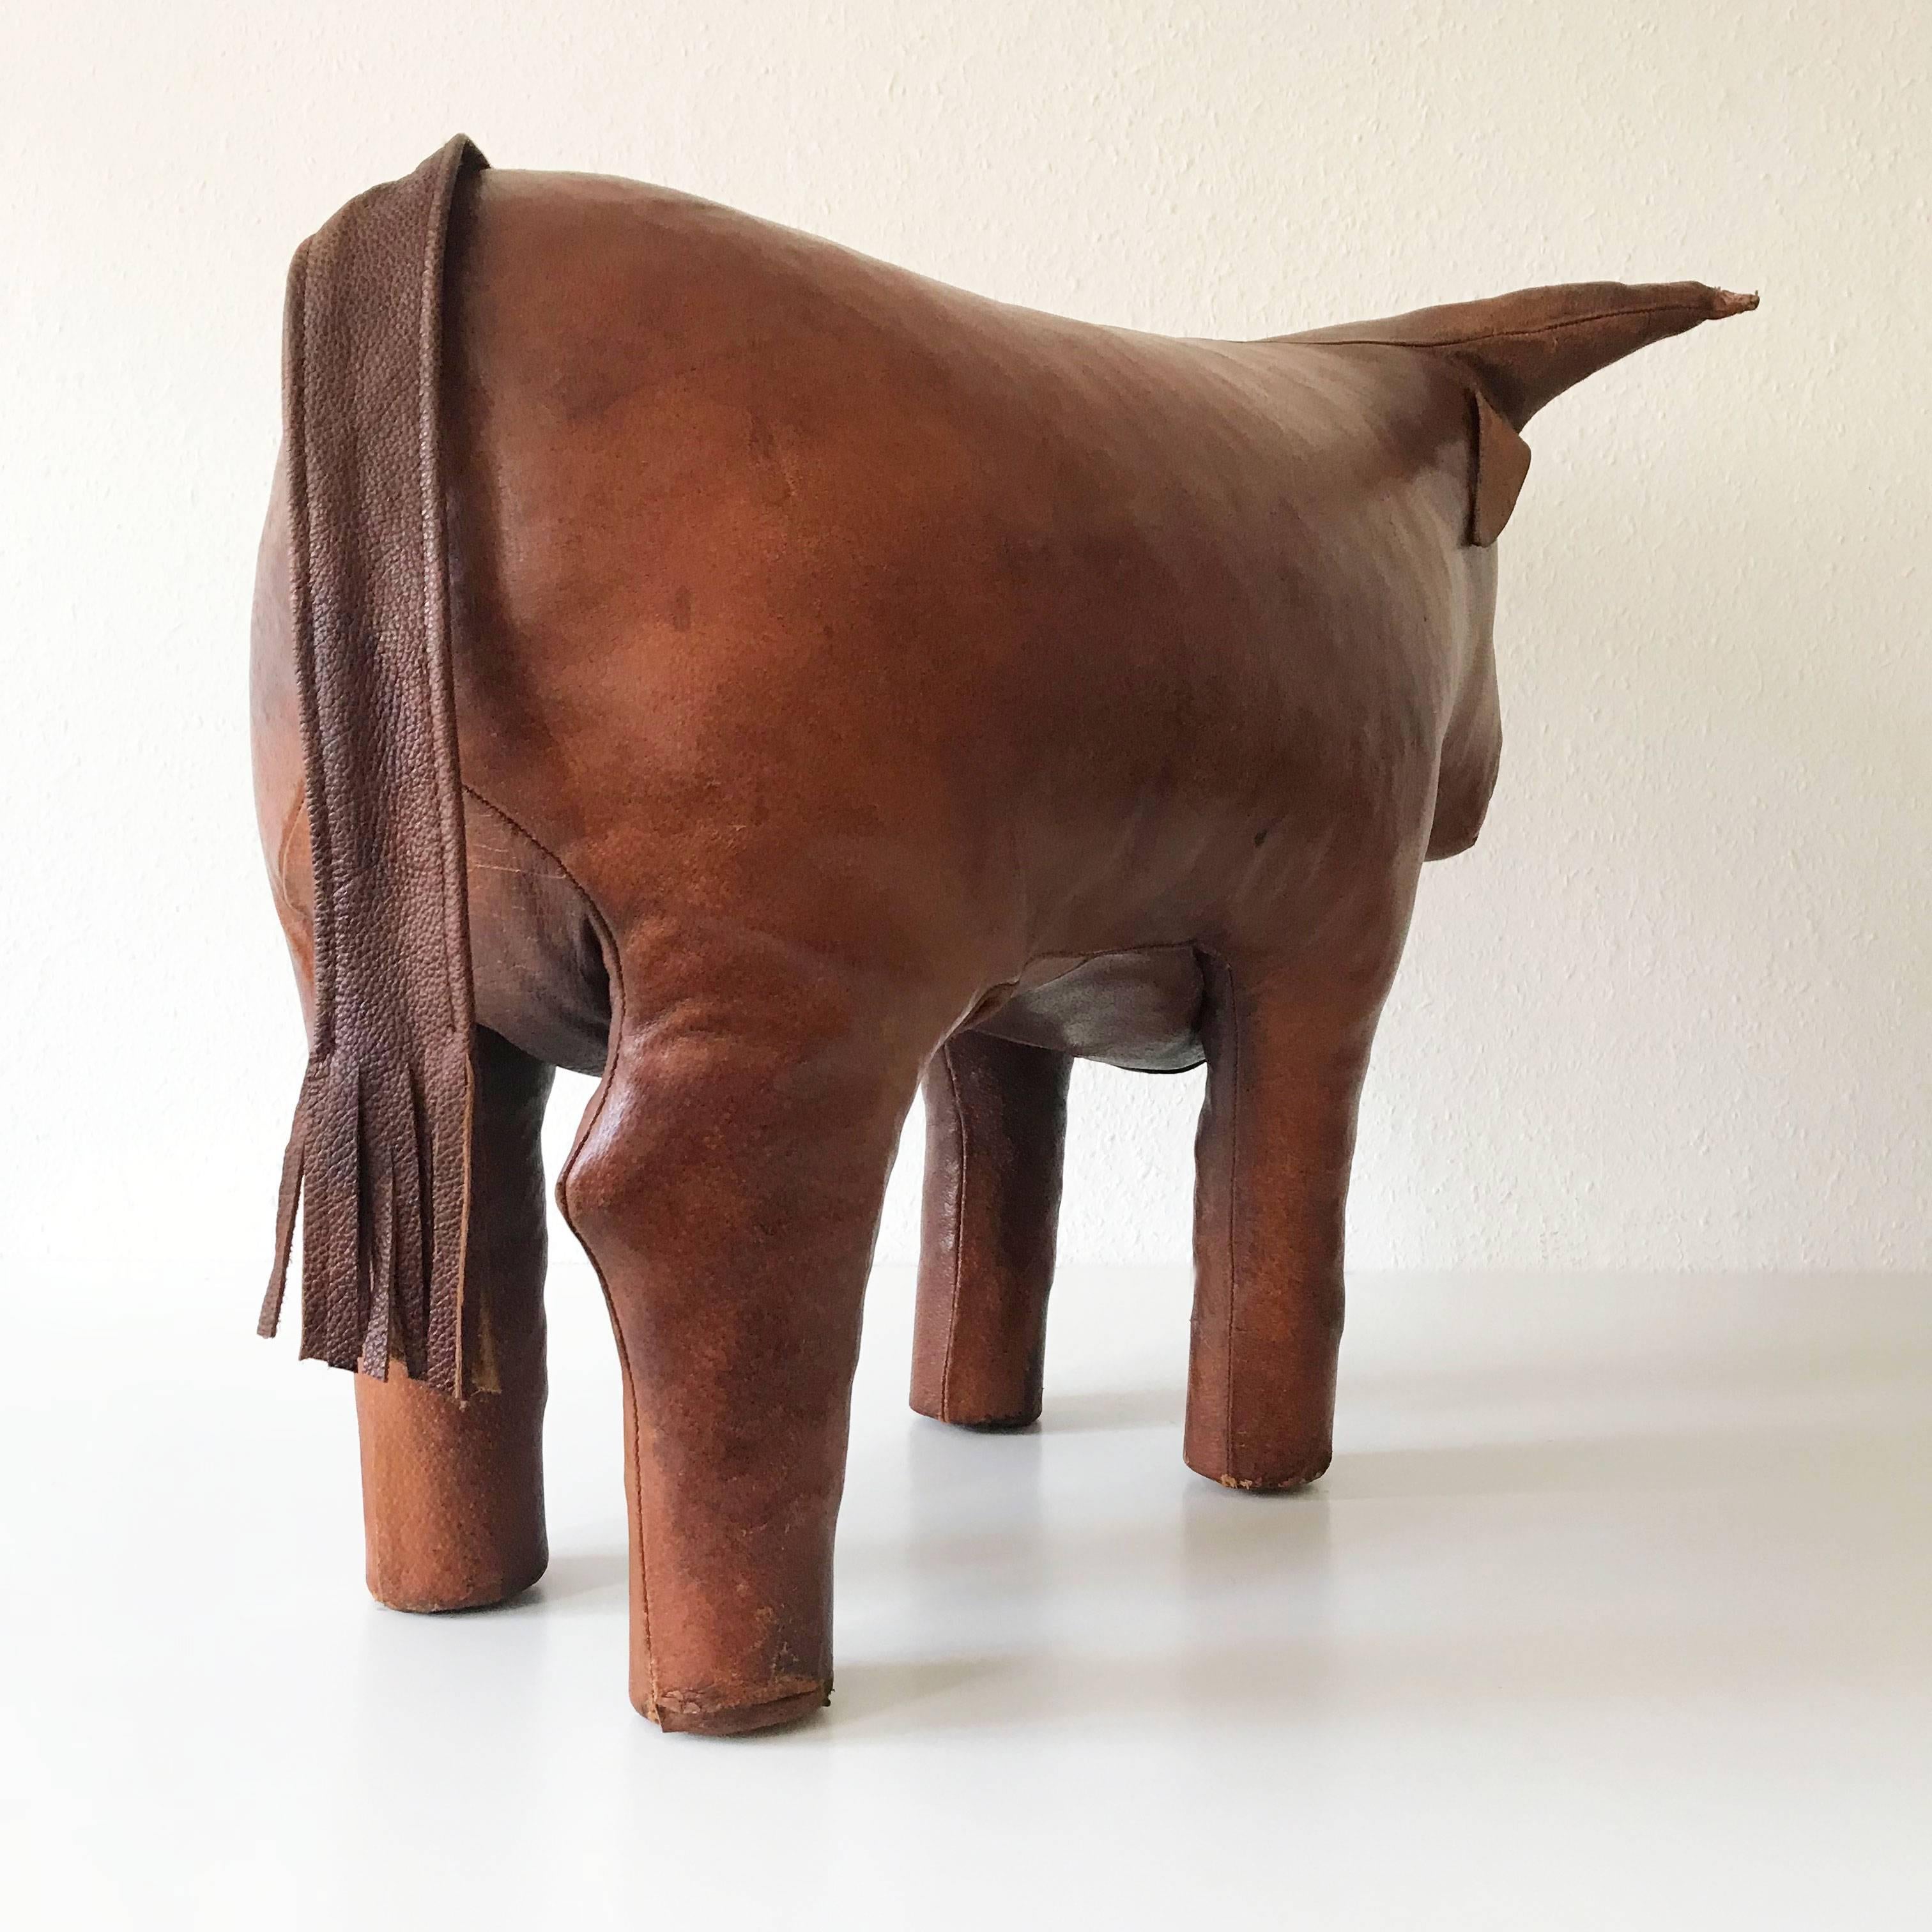 Mid-20th Century Original Leather Bull Footstool or Ottoman by Dimitri Omersa, 1960s, England